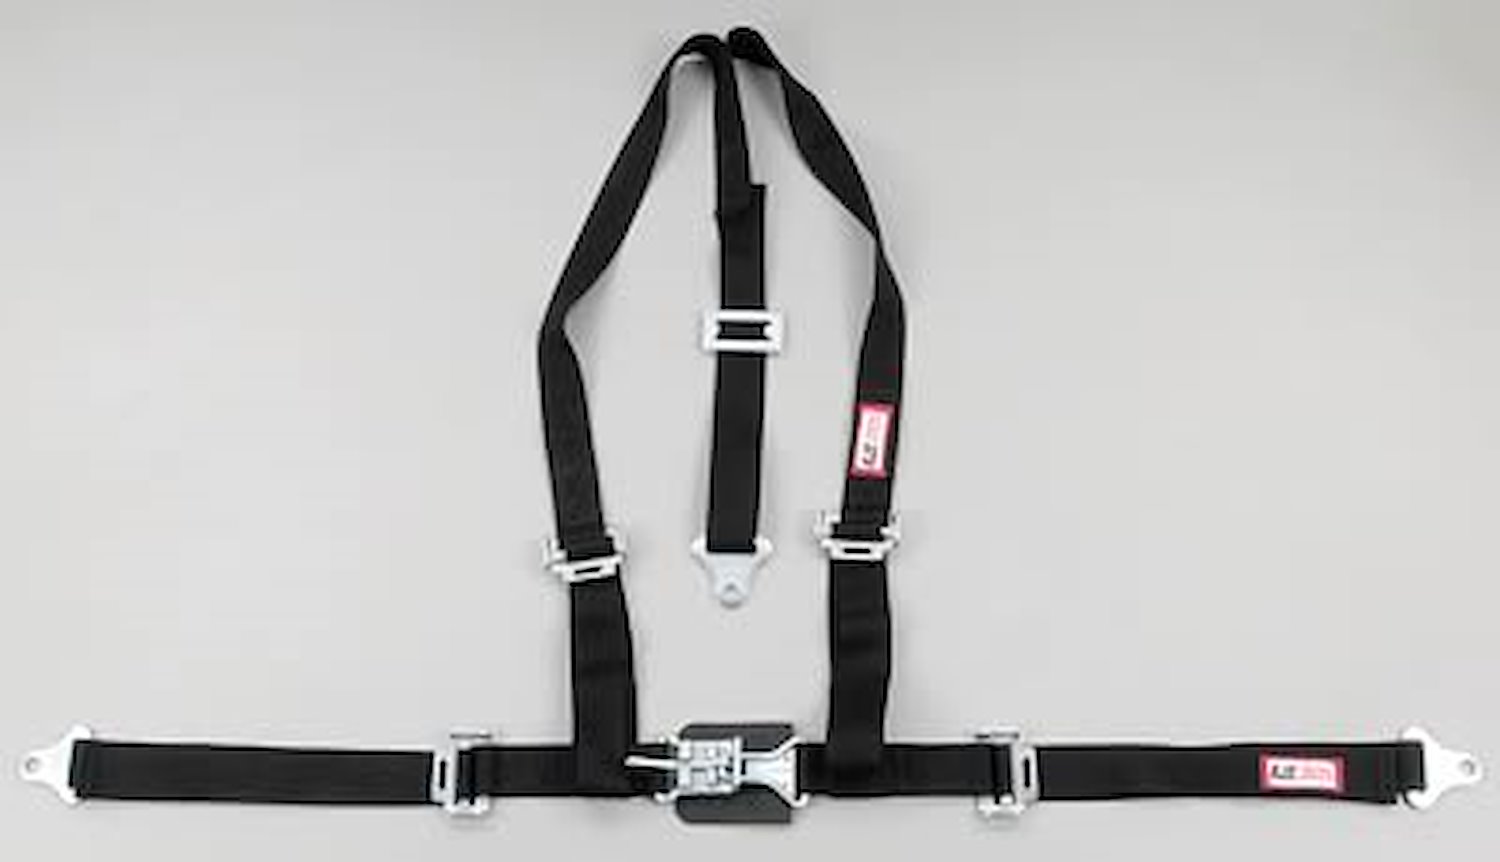 NON-SFI L&L HARNESS 3 PULL DOWN Lap Belt w/adjuster SNAP 2 S.H. Individual FLOOR Mount w/STERNUM STRAP WRAP/SNAP RED